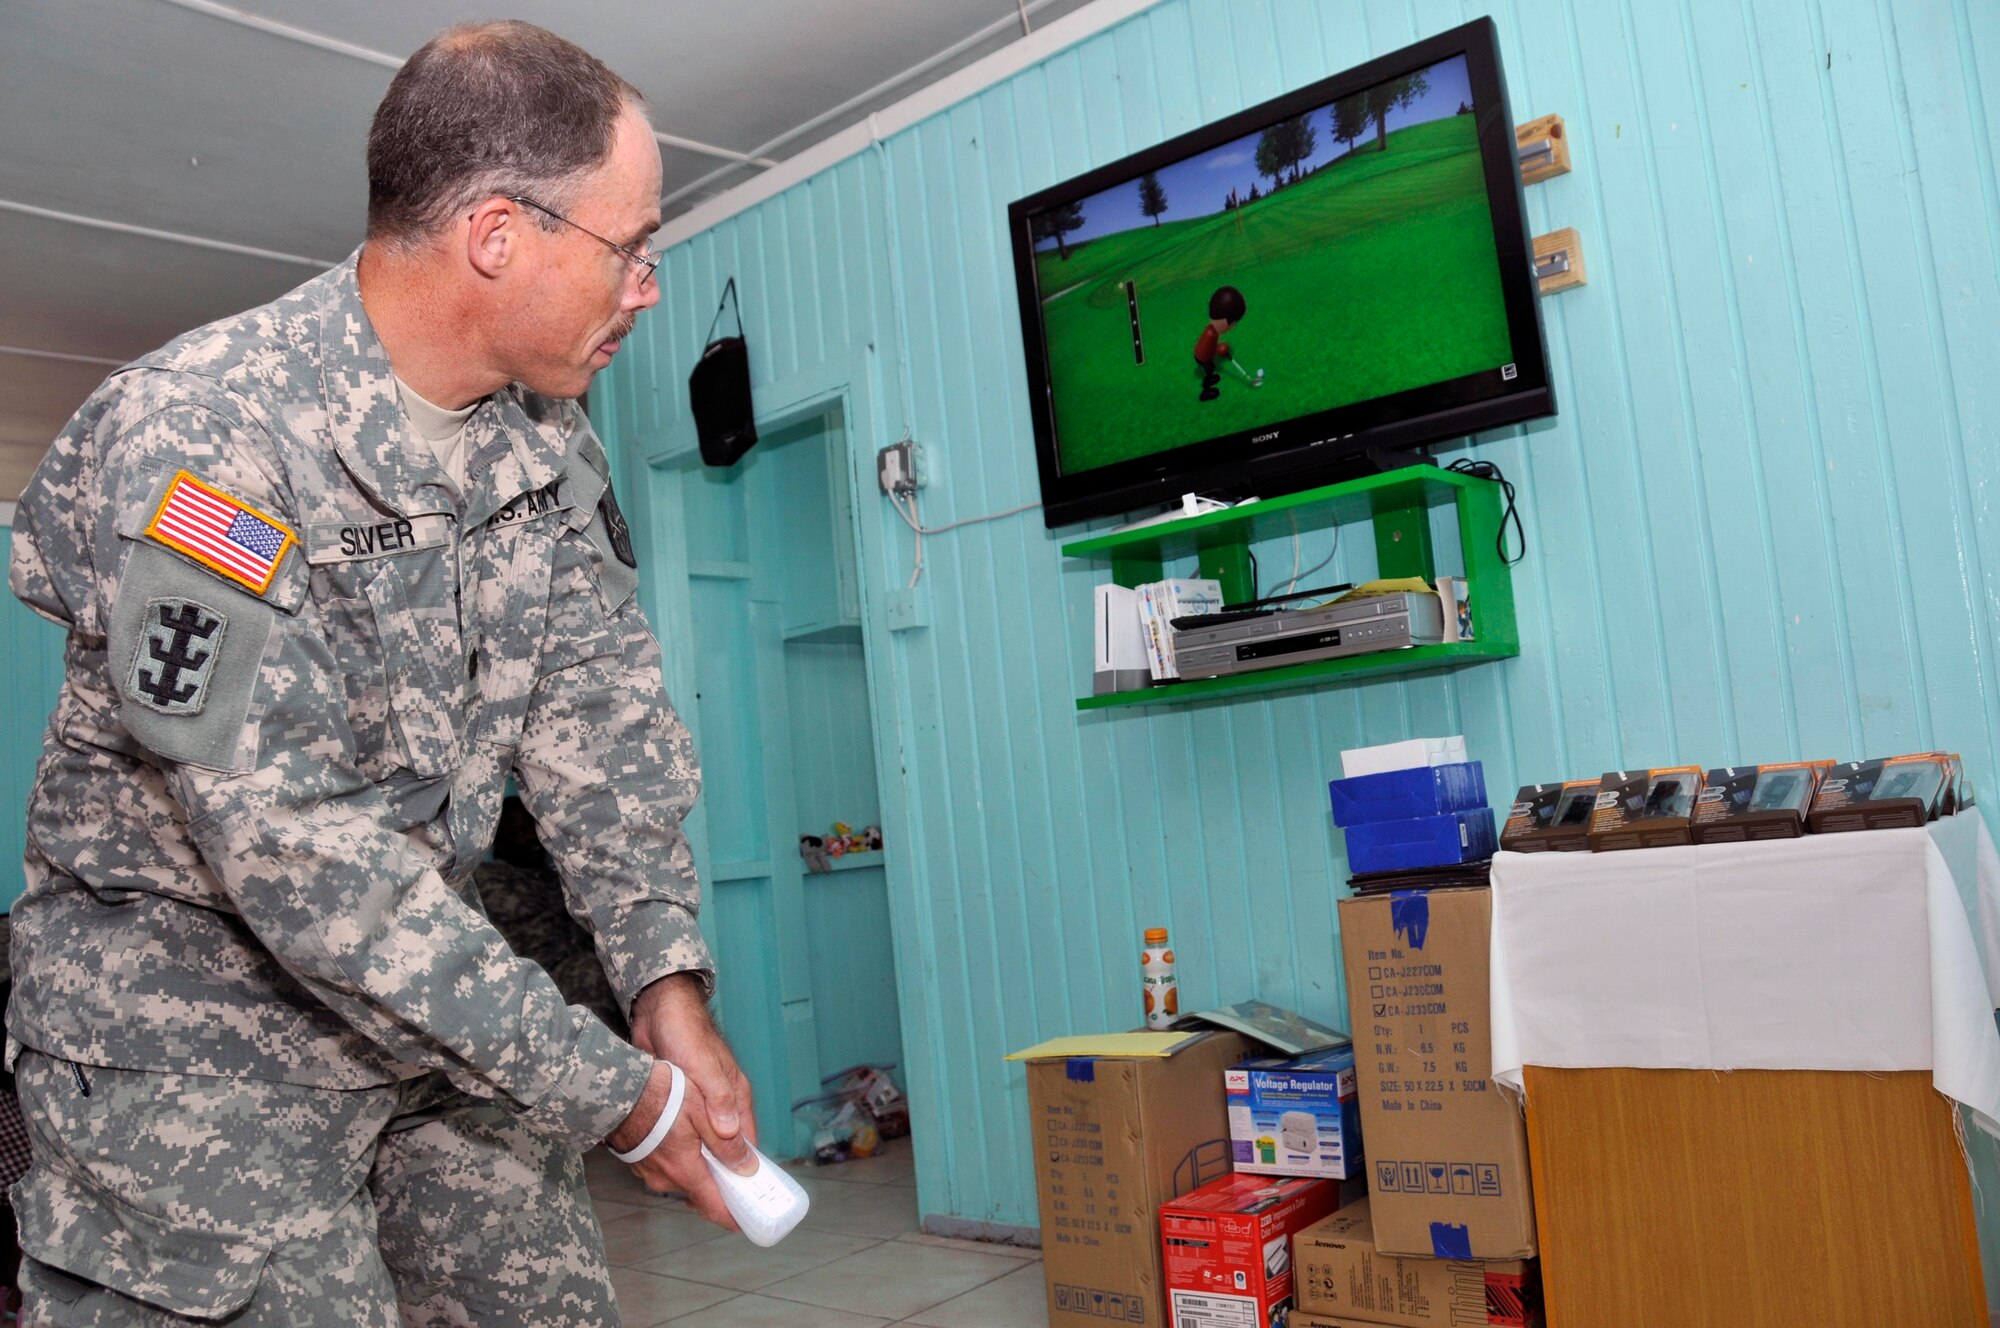 Lt. Col. David Silver commander of the 878th Engineer Battalion, Georgia Army National Guard, tests out the new Nintendo Wii that was donated to the Joshua's Place Orphanage Sept. 9, 2009. Soldiers from the Georgia Army National used donation money collected back home, to buy a 40 inch LCD TV, a Nintendo Wii with six video games, 20 MP3 players and a DVD/VCR player (U.S. Air Force photo by Airman 1st Class Perry Aston) (Released)